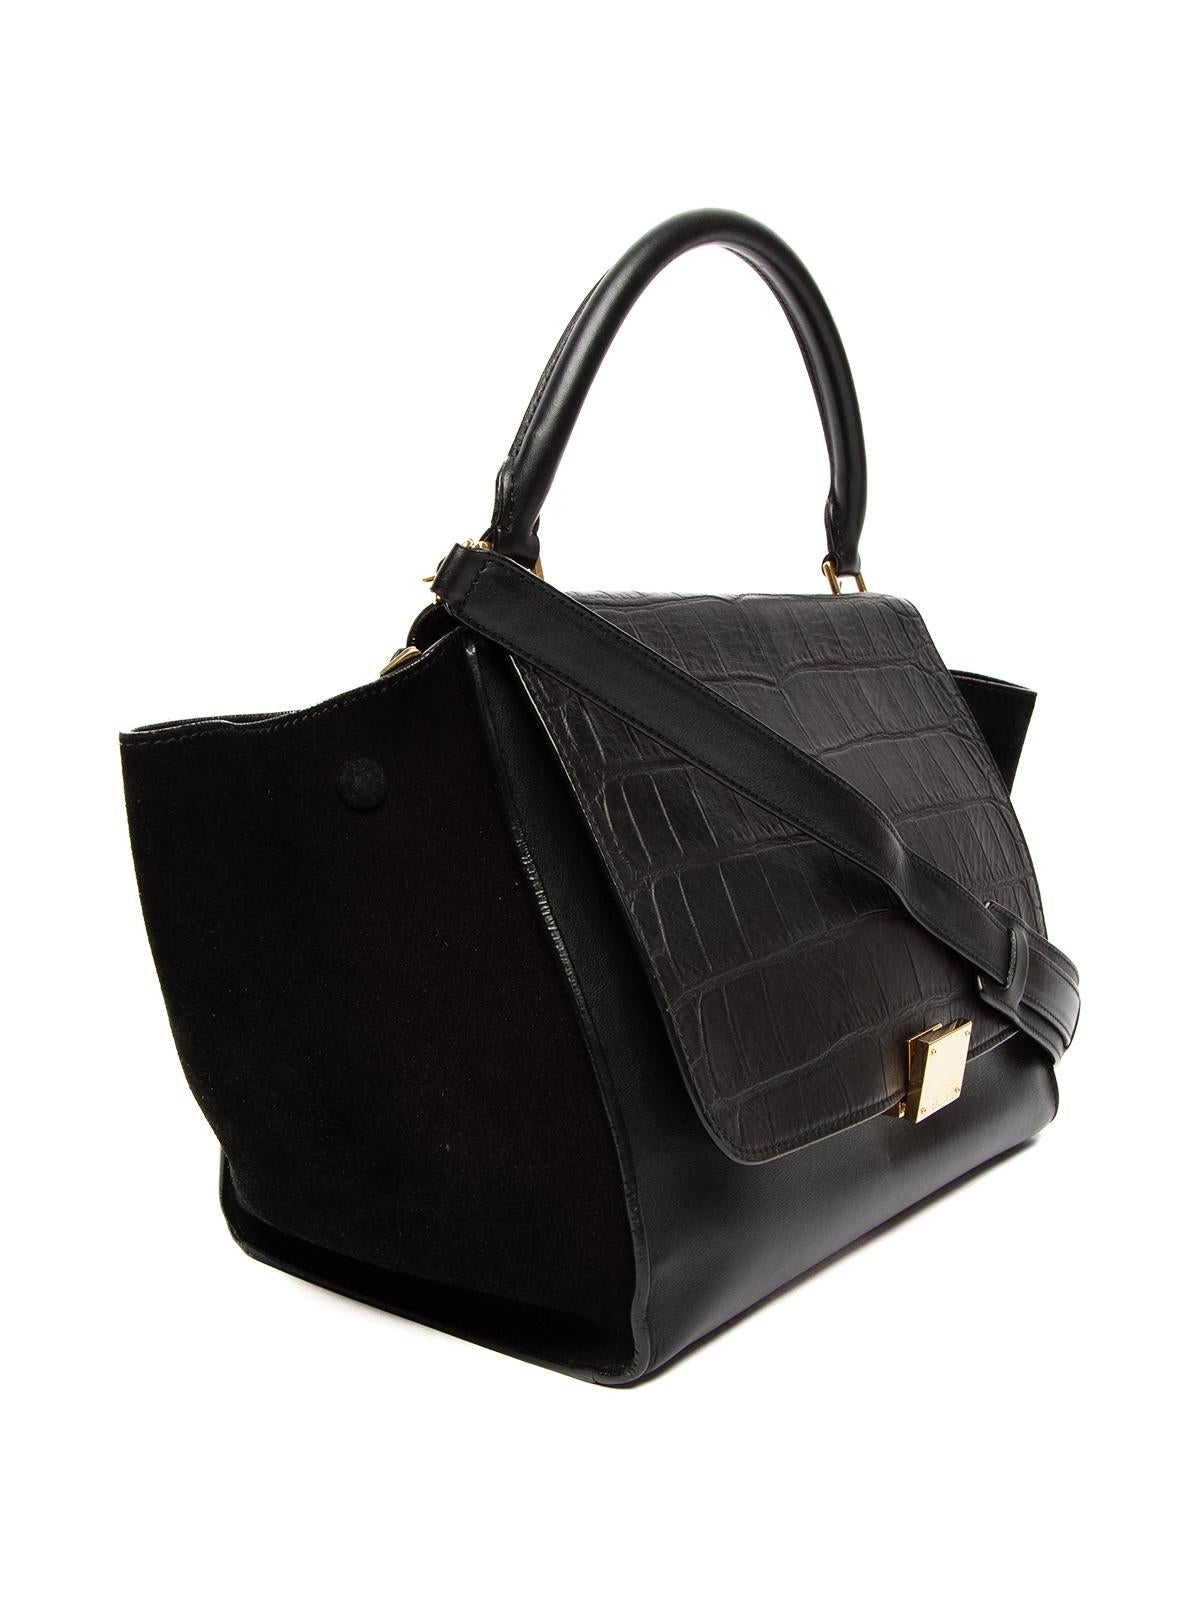 CONDITION is Very good. Very minor wear to bag is evident. Minimal wear to suede outer on this used Celine designer resale item. Details Trapeze Bag Colour - black Material - leather and suede Removable shoulder strap Zip fastening with push lock